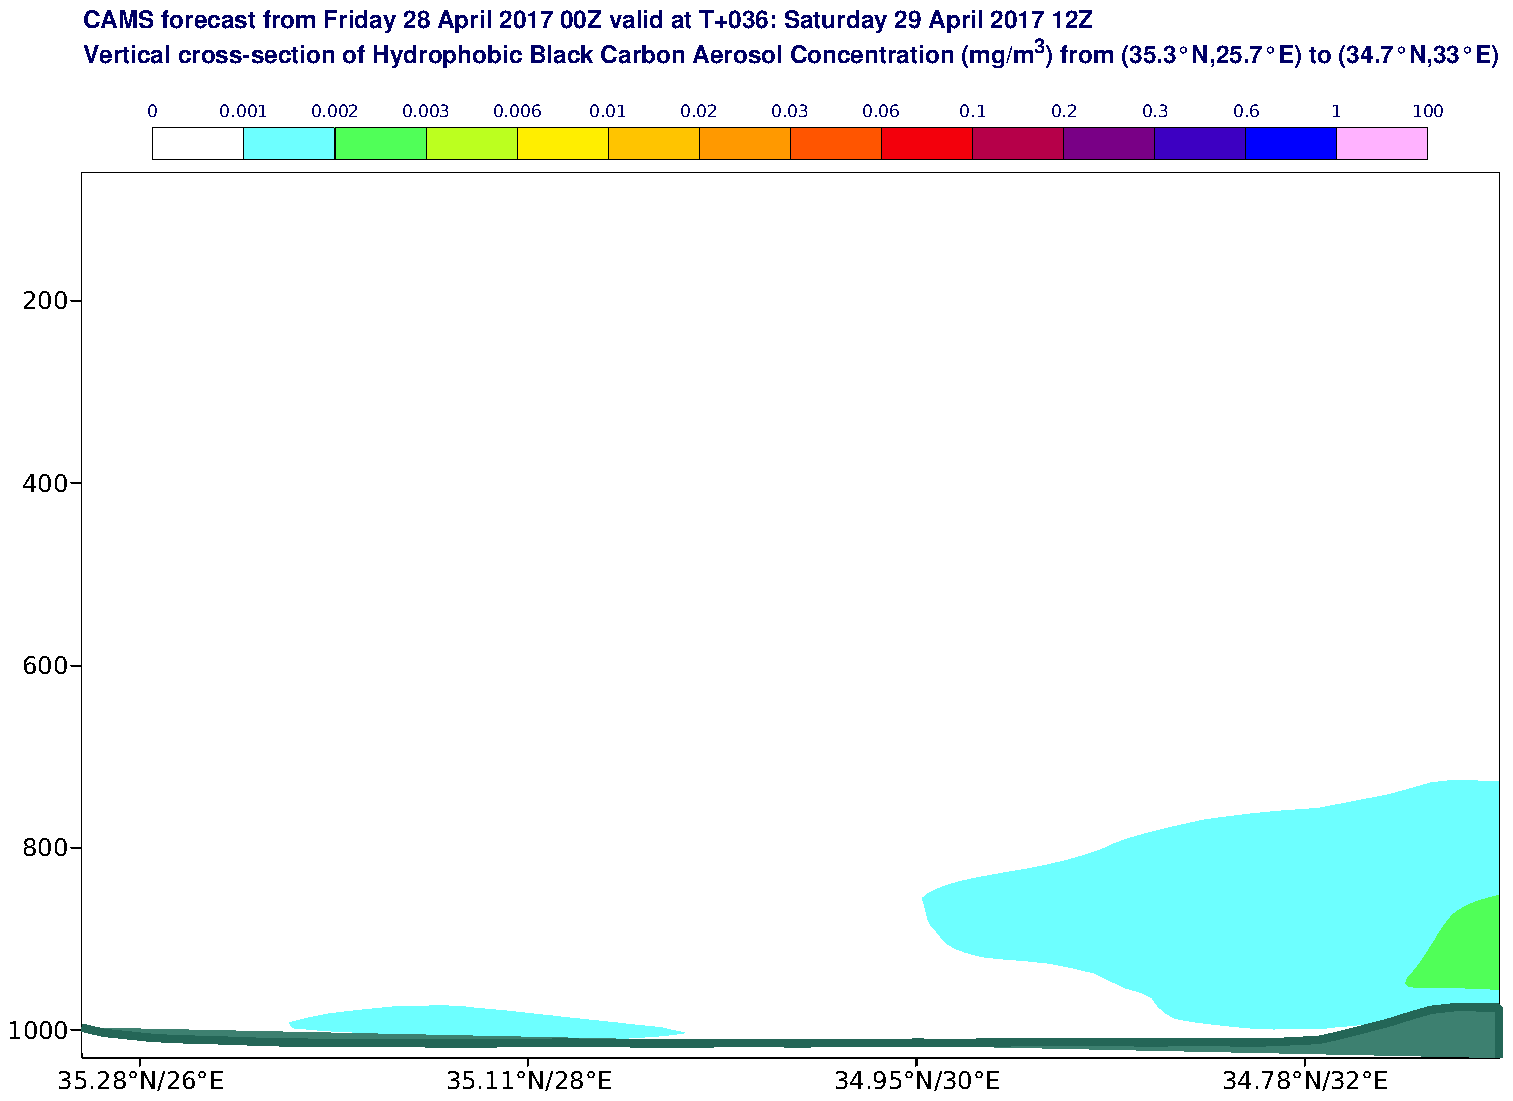 Vertical cross-section of Hydrophobic Black Carbon Aerosol Concentration (mg/m3) valid at T36 - 2017-04-29 12:00